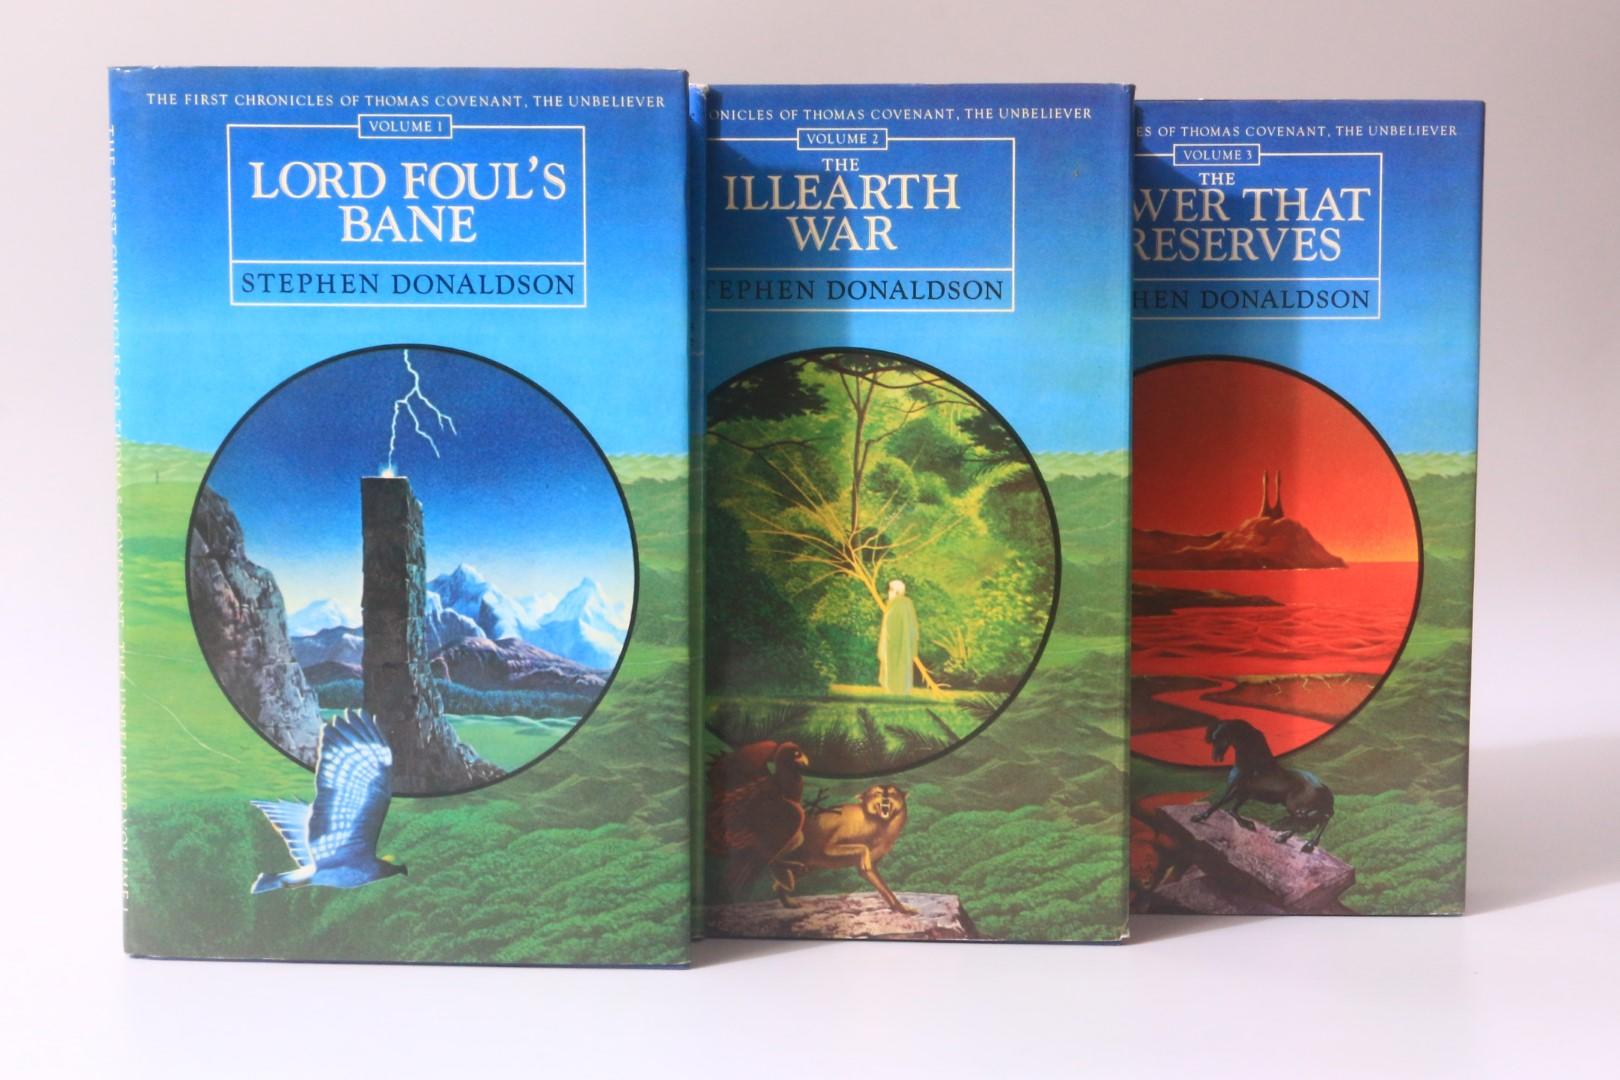 Stephen Donaldson - The First Chronicles of Thomas Covenant [comprising] Lord Foul's Bane, The Illearth War & The Power that Preserves - Molendinar Press, 1980, First Edition.